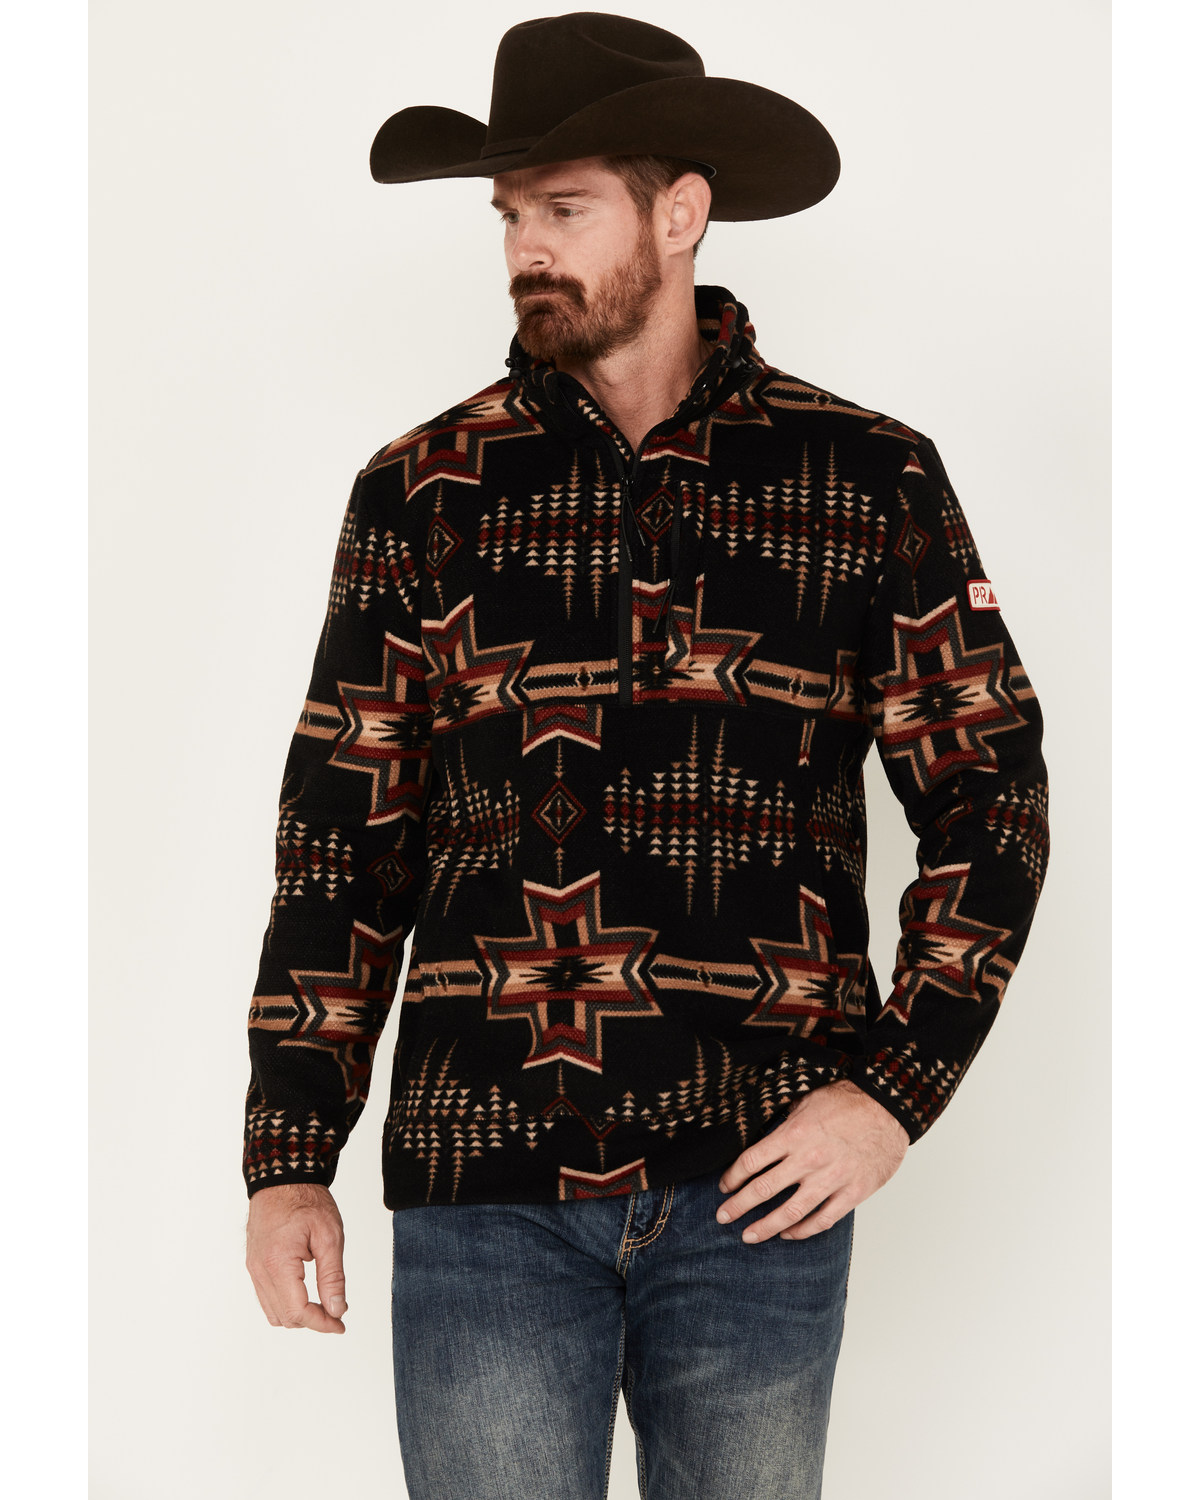 Powder River Outfitters by Panhandle Men's Pro Southwestern Print 1/4 Zip Performance Pullover